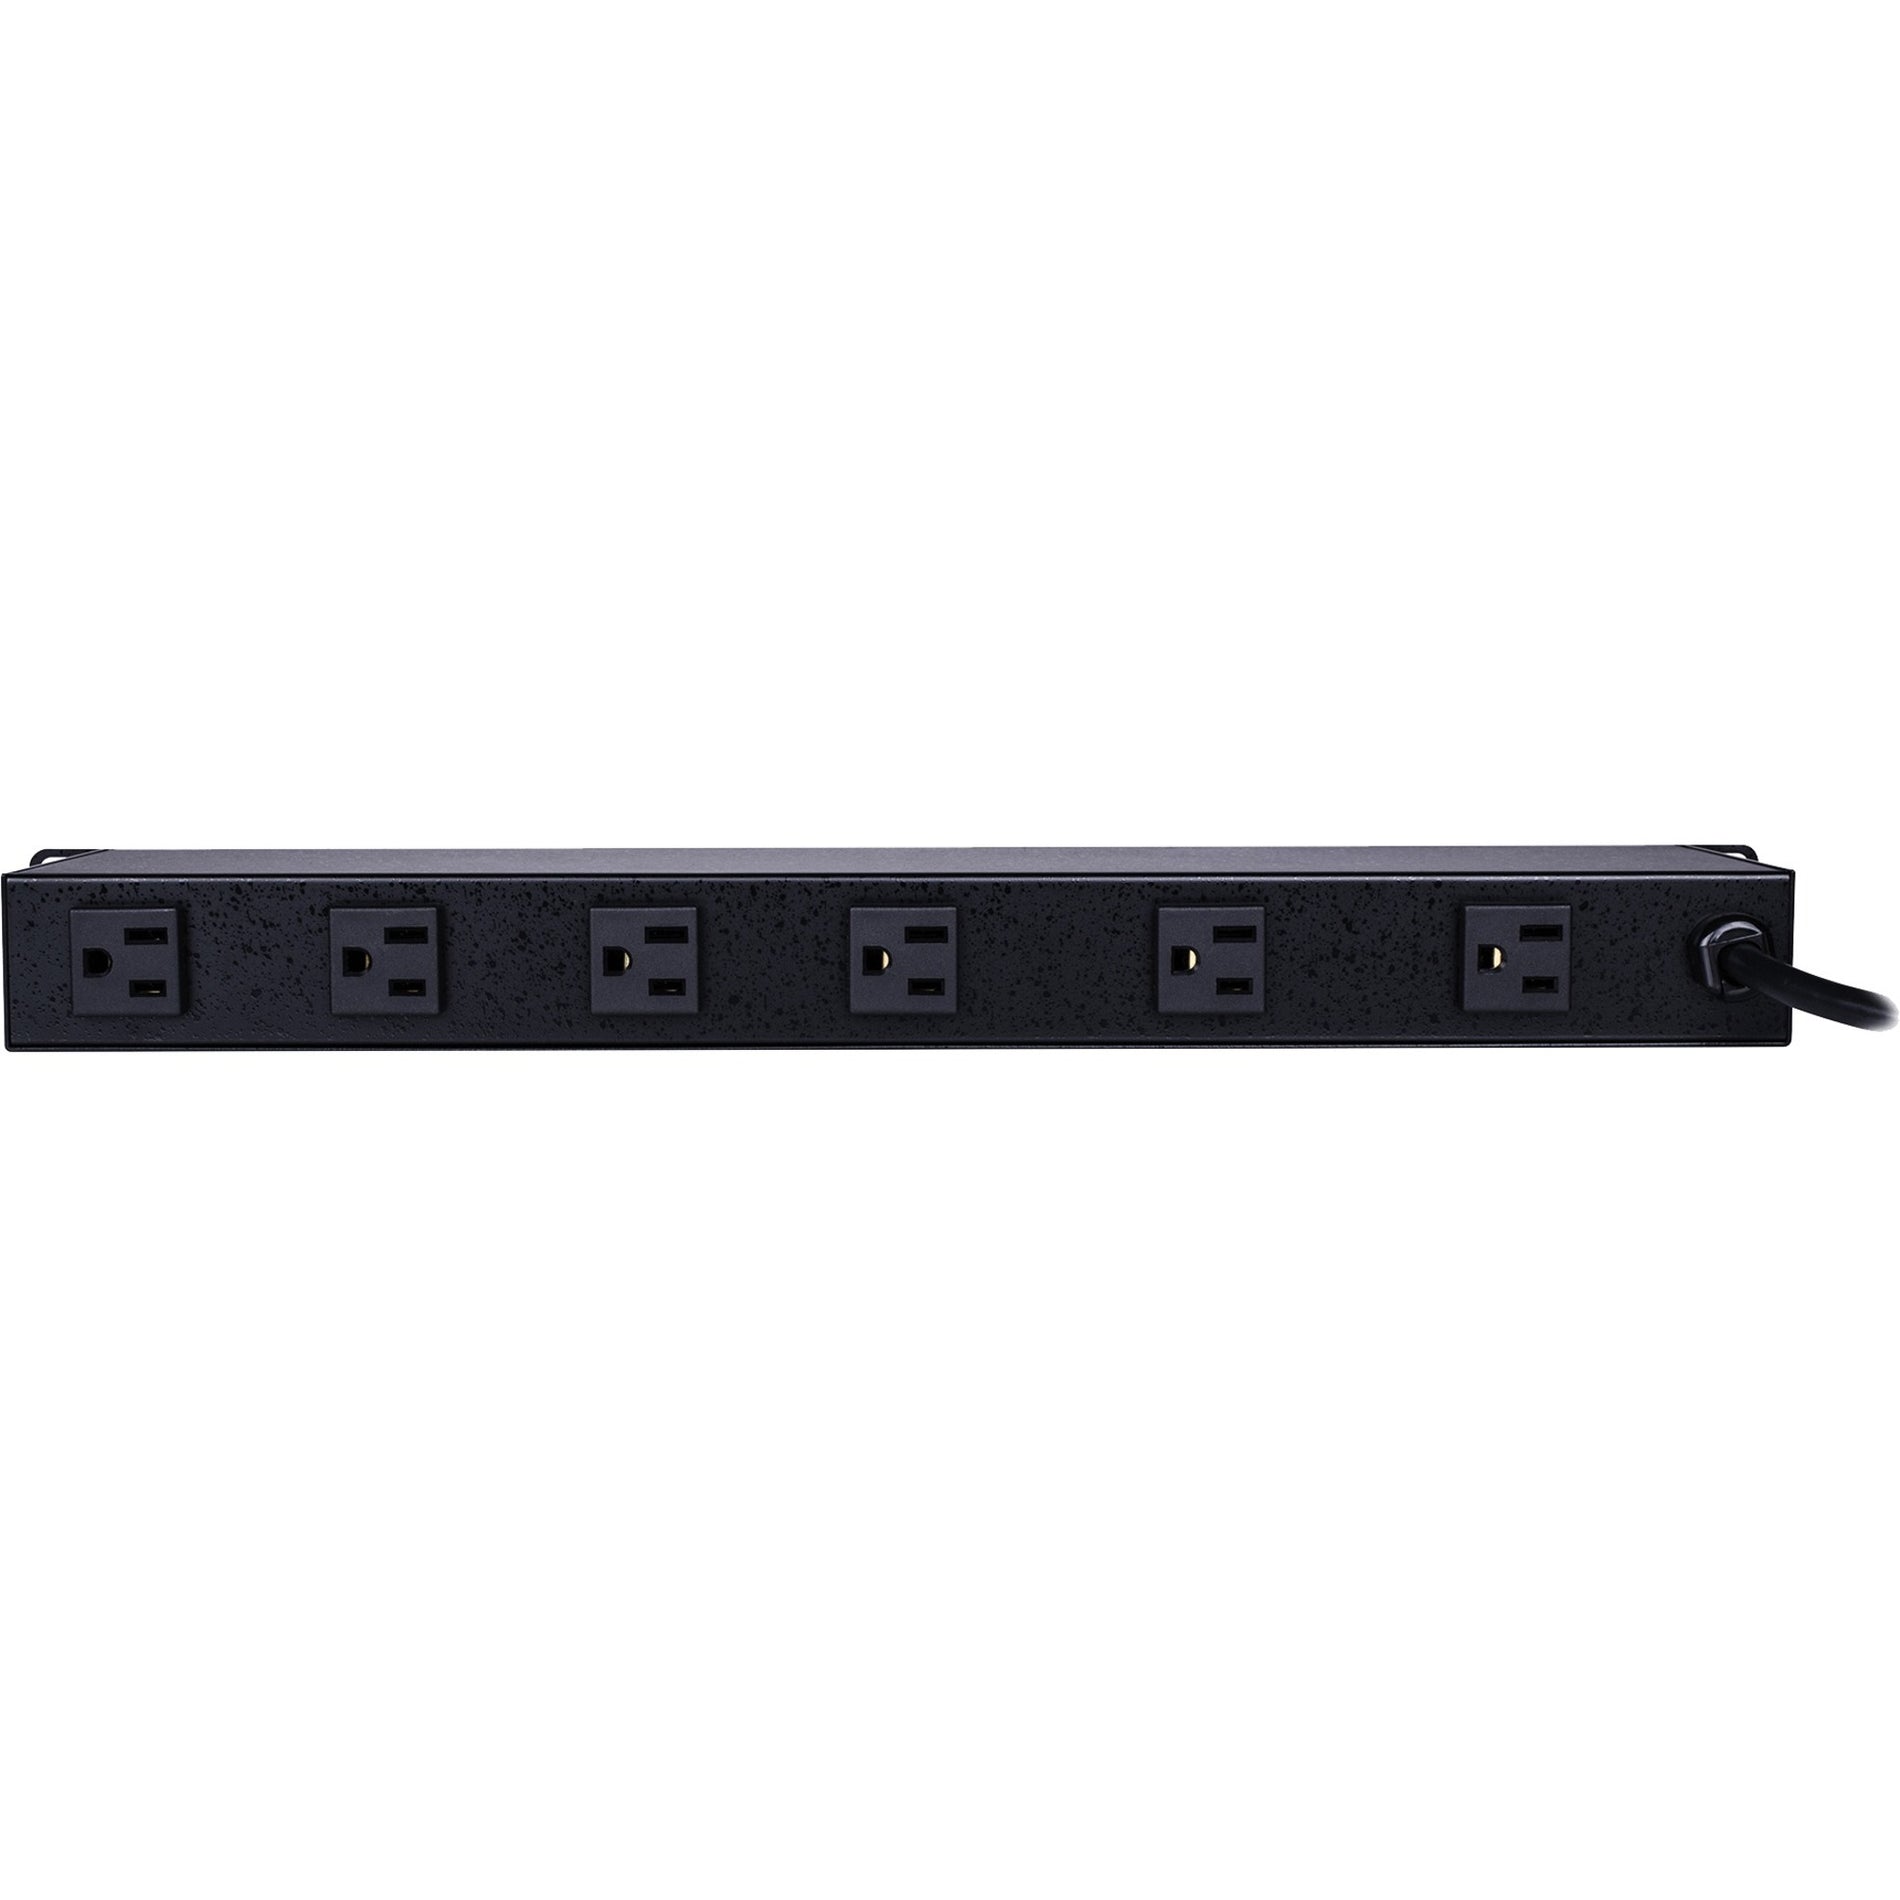 CyberPower CPS-1215RMS Rackmount PDU/Surge Strip, 15 Amps, 12 Outlets, 1800 J